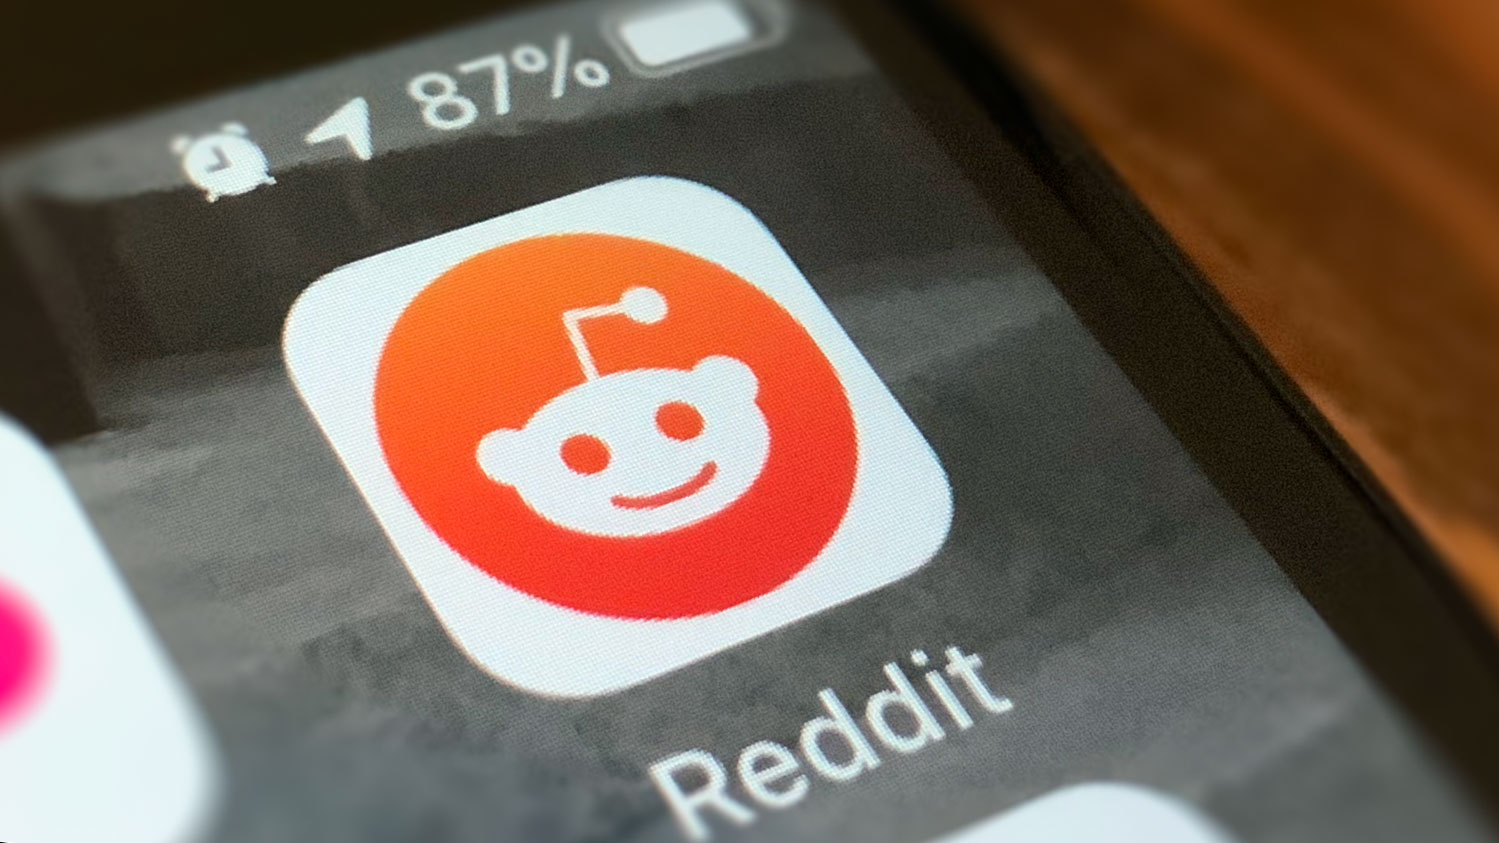 Reddit now lets iOS users share to Snapchat | TechCrunch